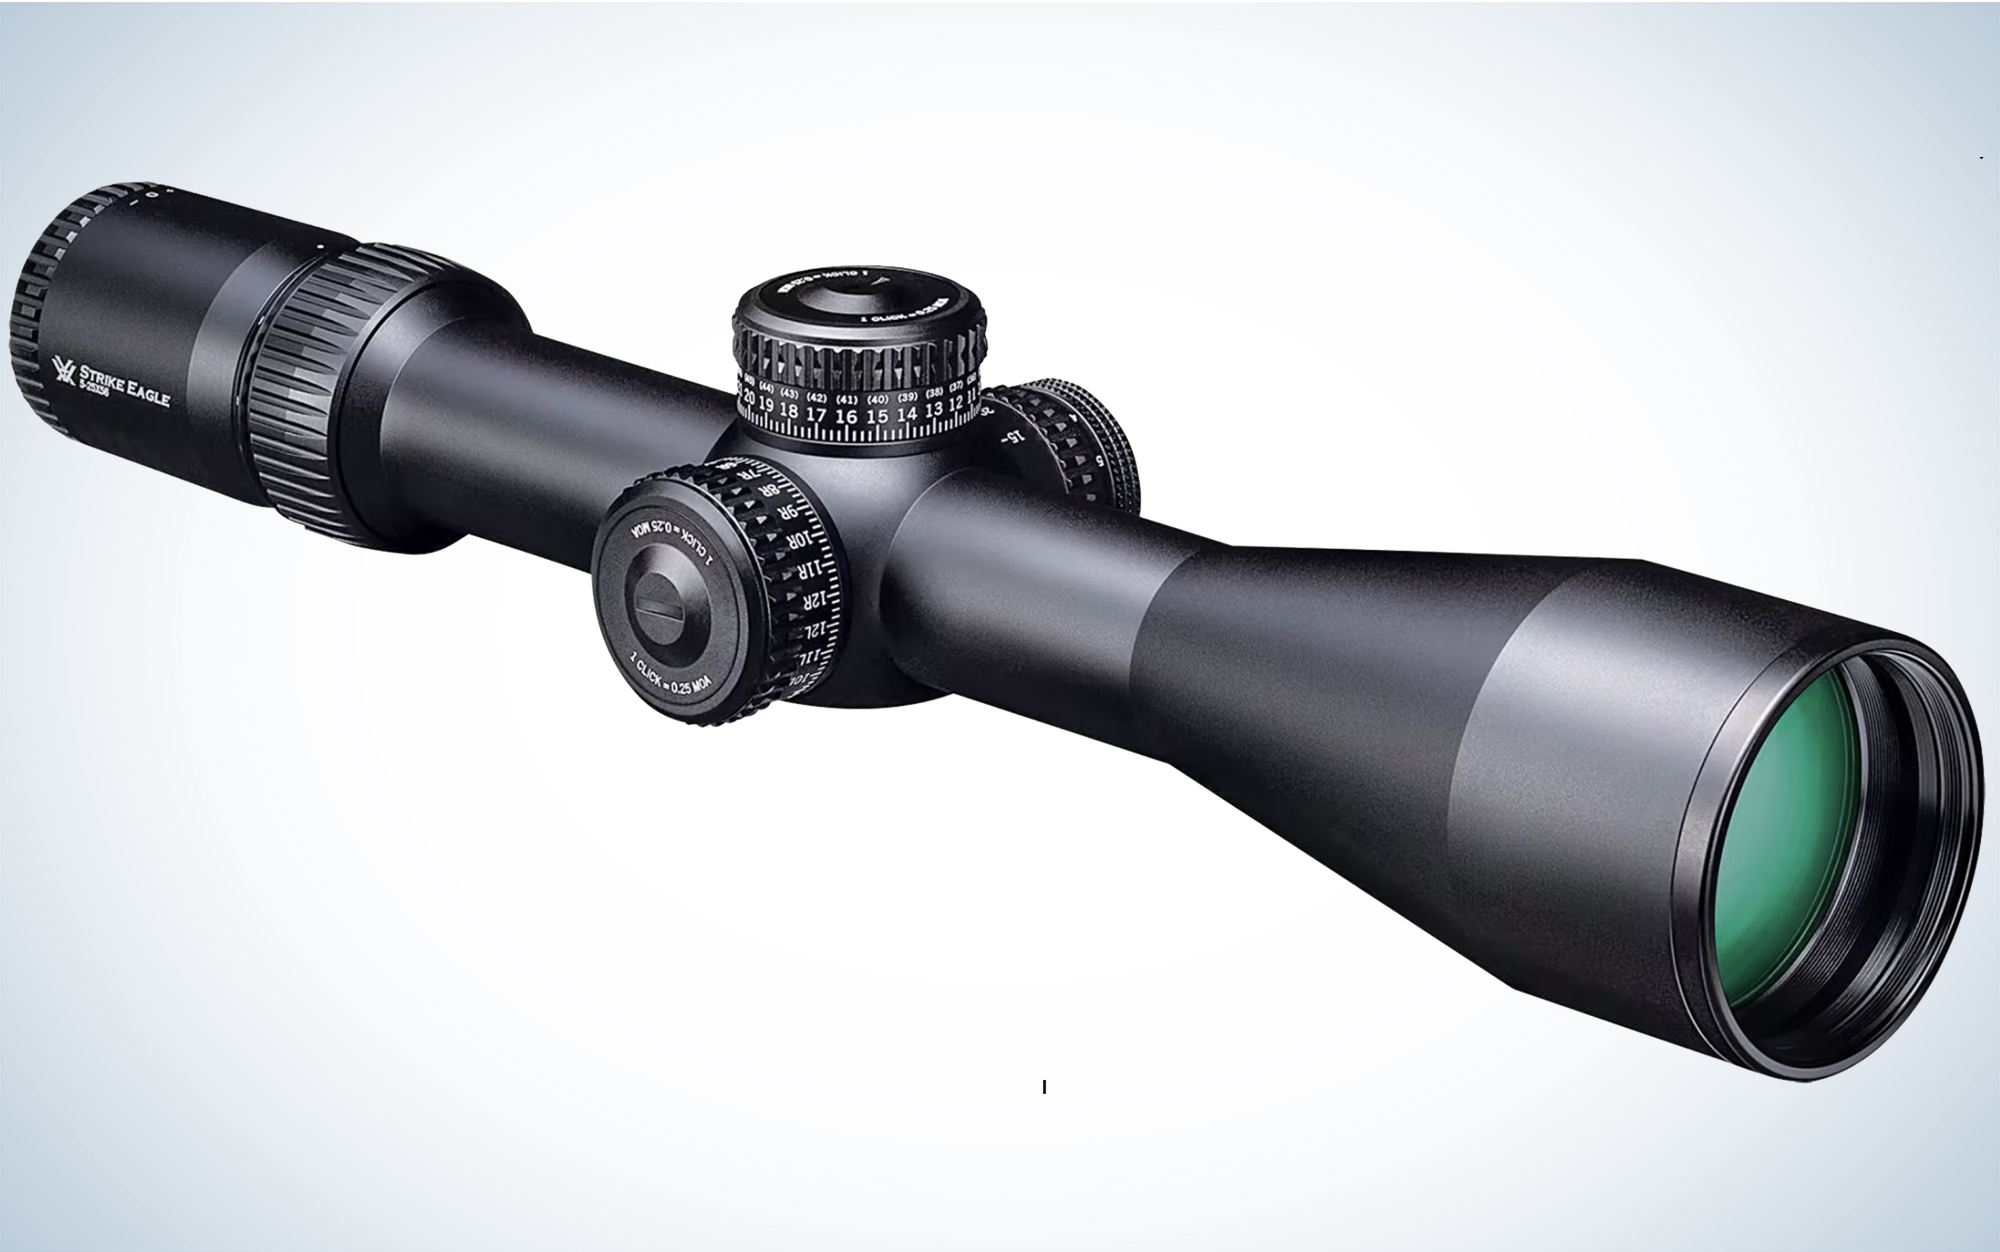 The Vortex Strike Eagle 5-25x56 FFP is the best full-size precision scope.